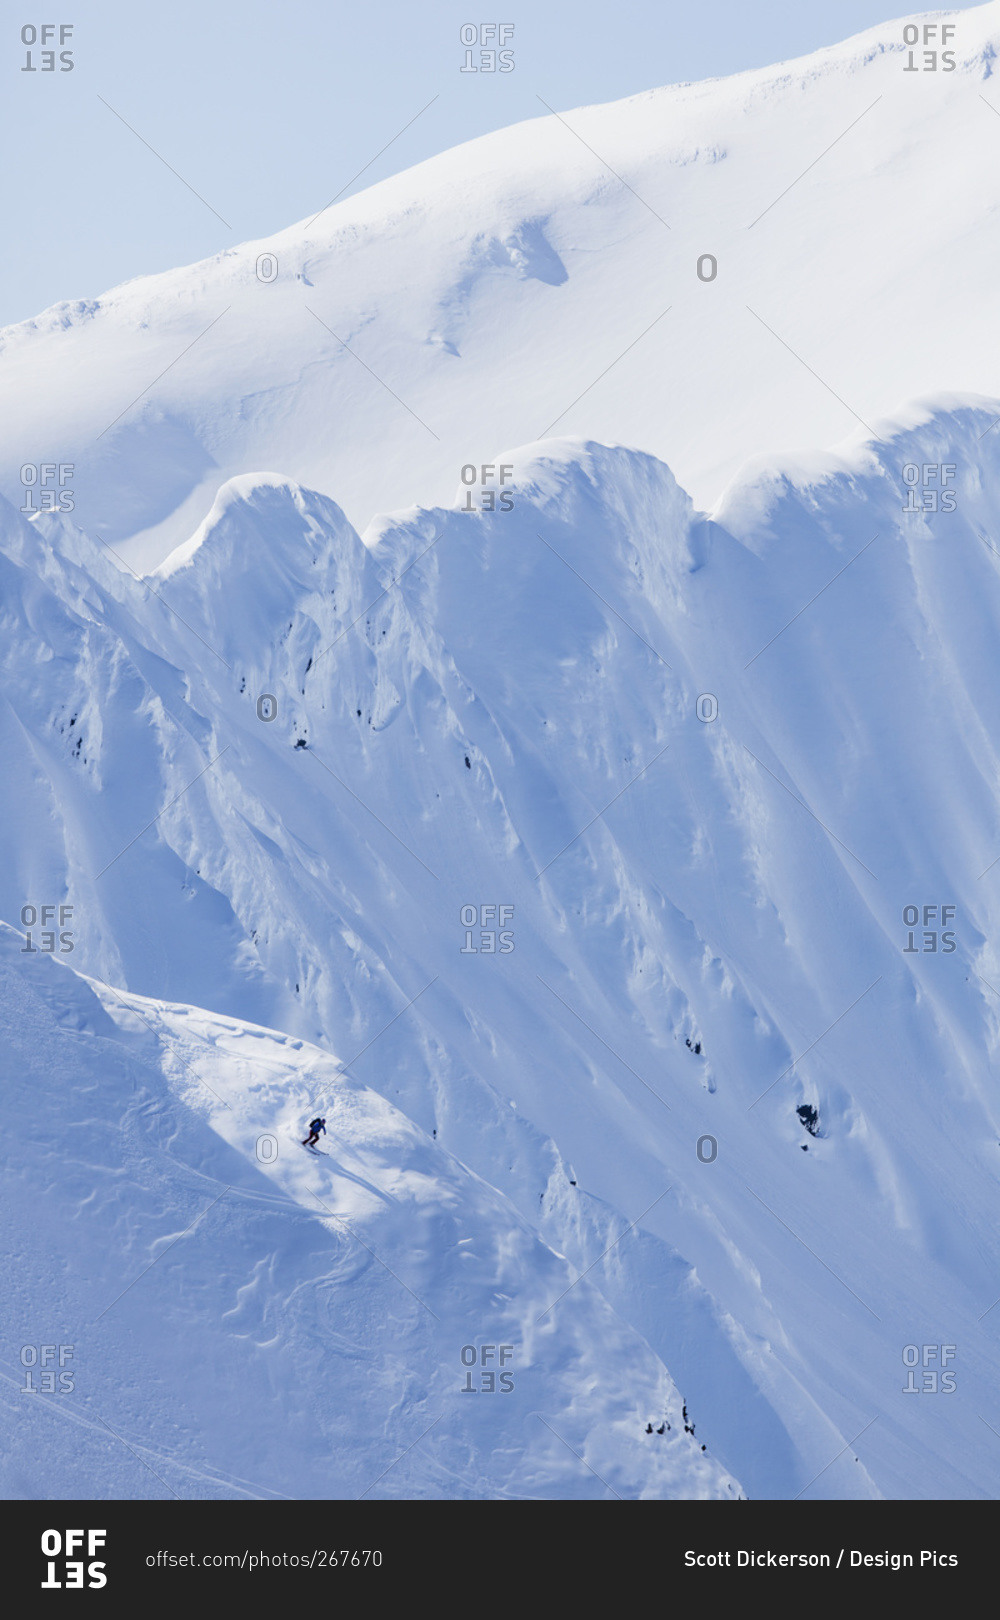 Backcountry Skiing In The Chugach Mountains In Late Winter, South-central Alaska, United States Of America